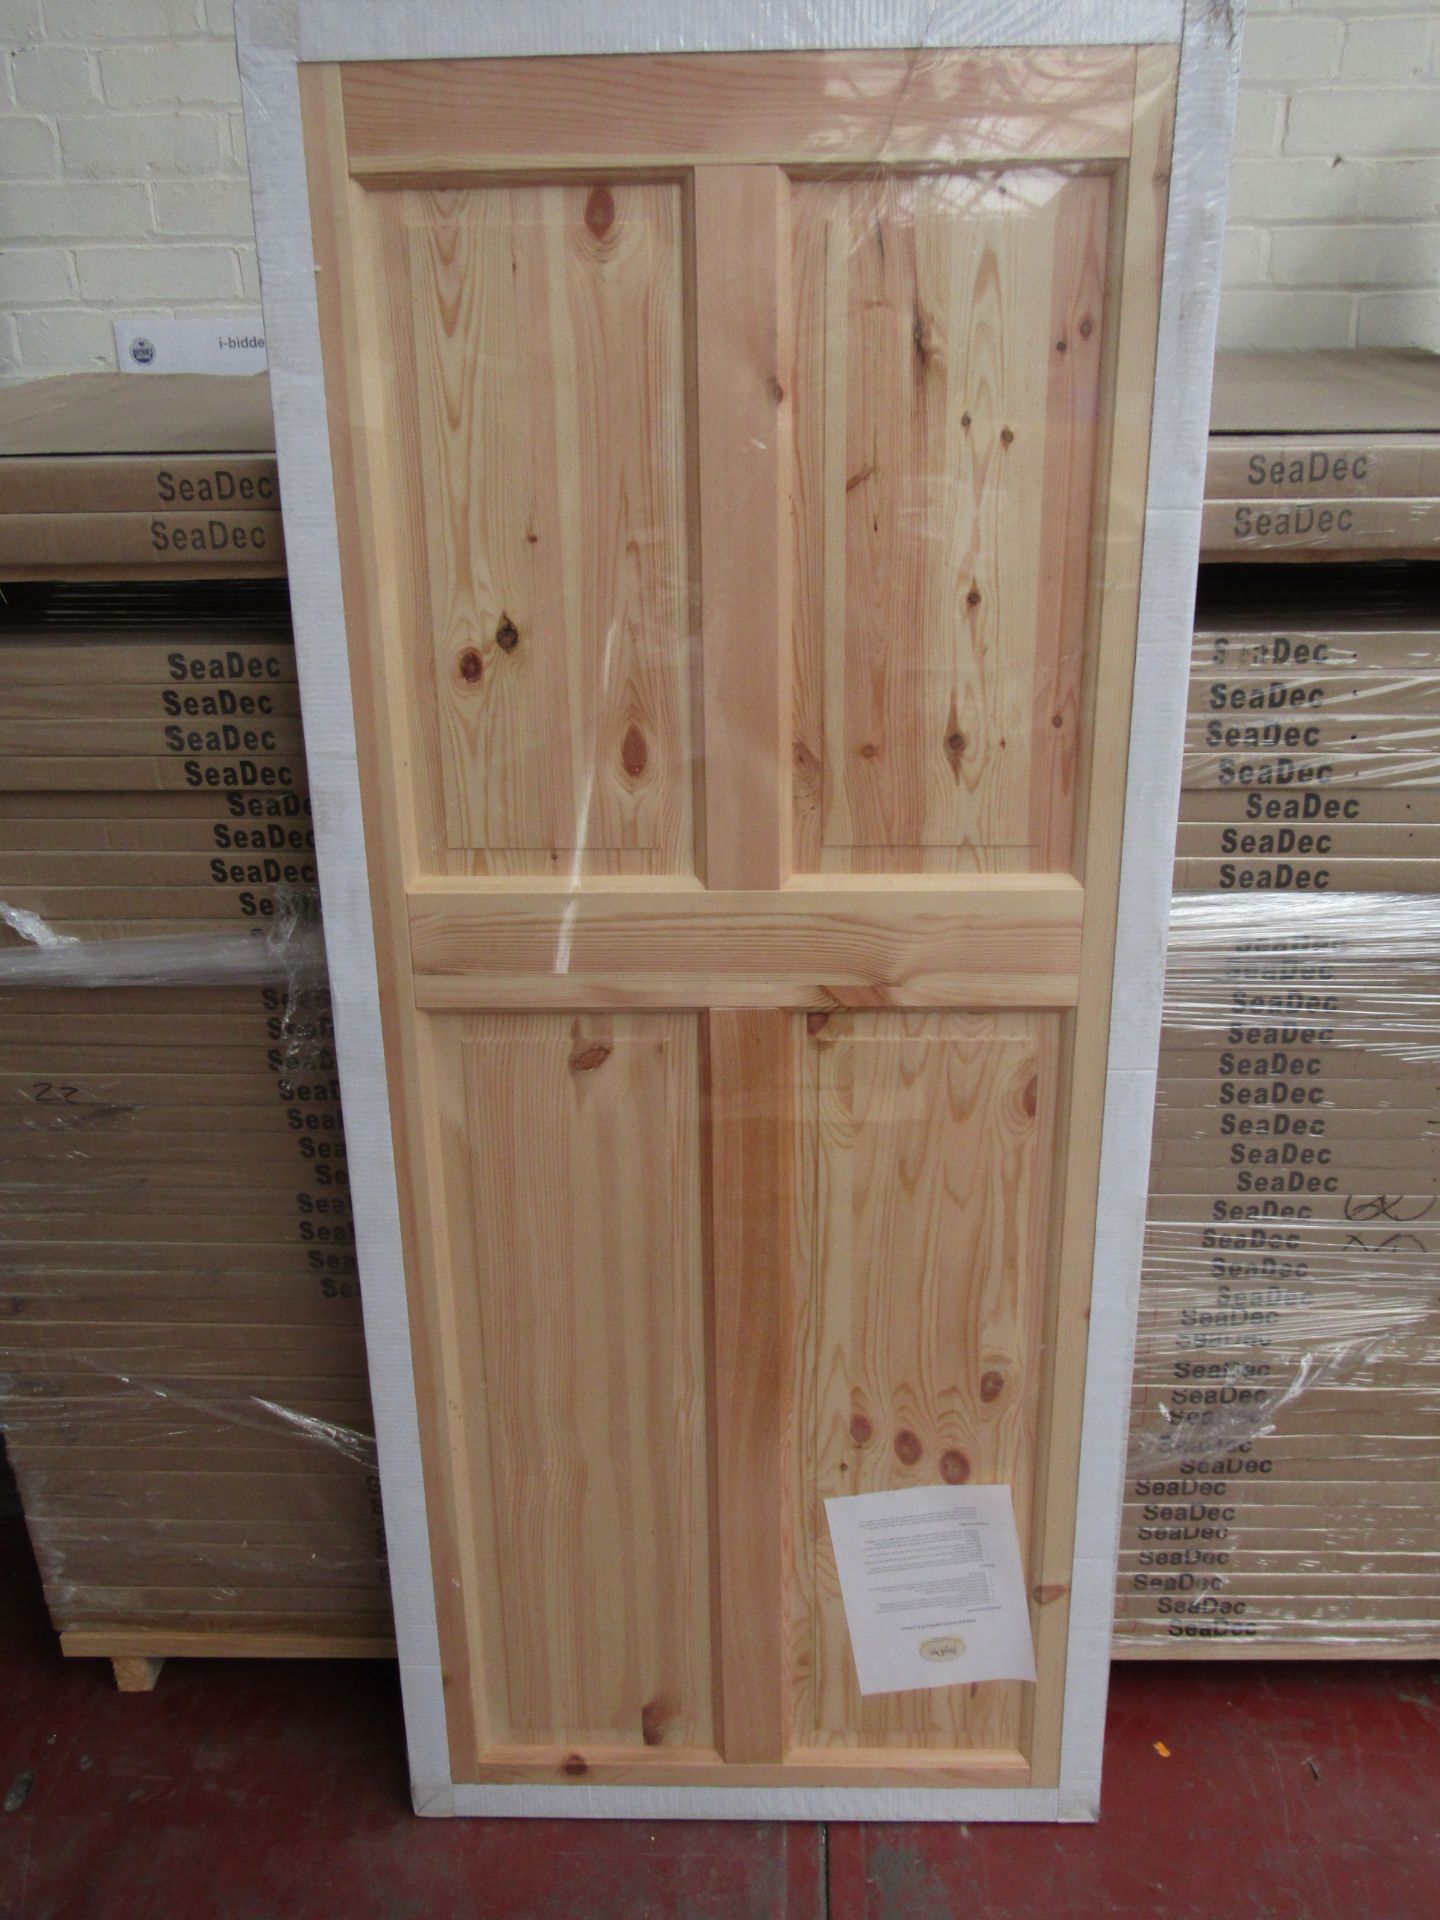 Seadec 4 Panel 78 x 33, Straight Top Knotty Pine Veneer Solid Wood Door, Pre-finished to a High